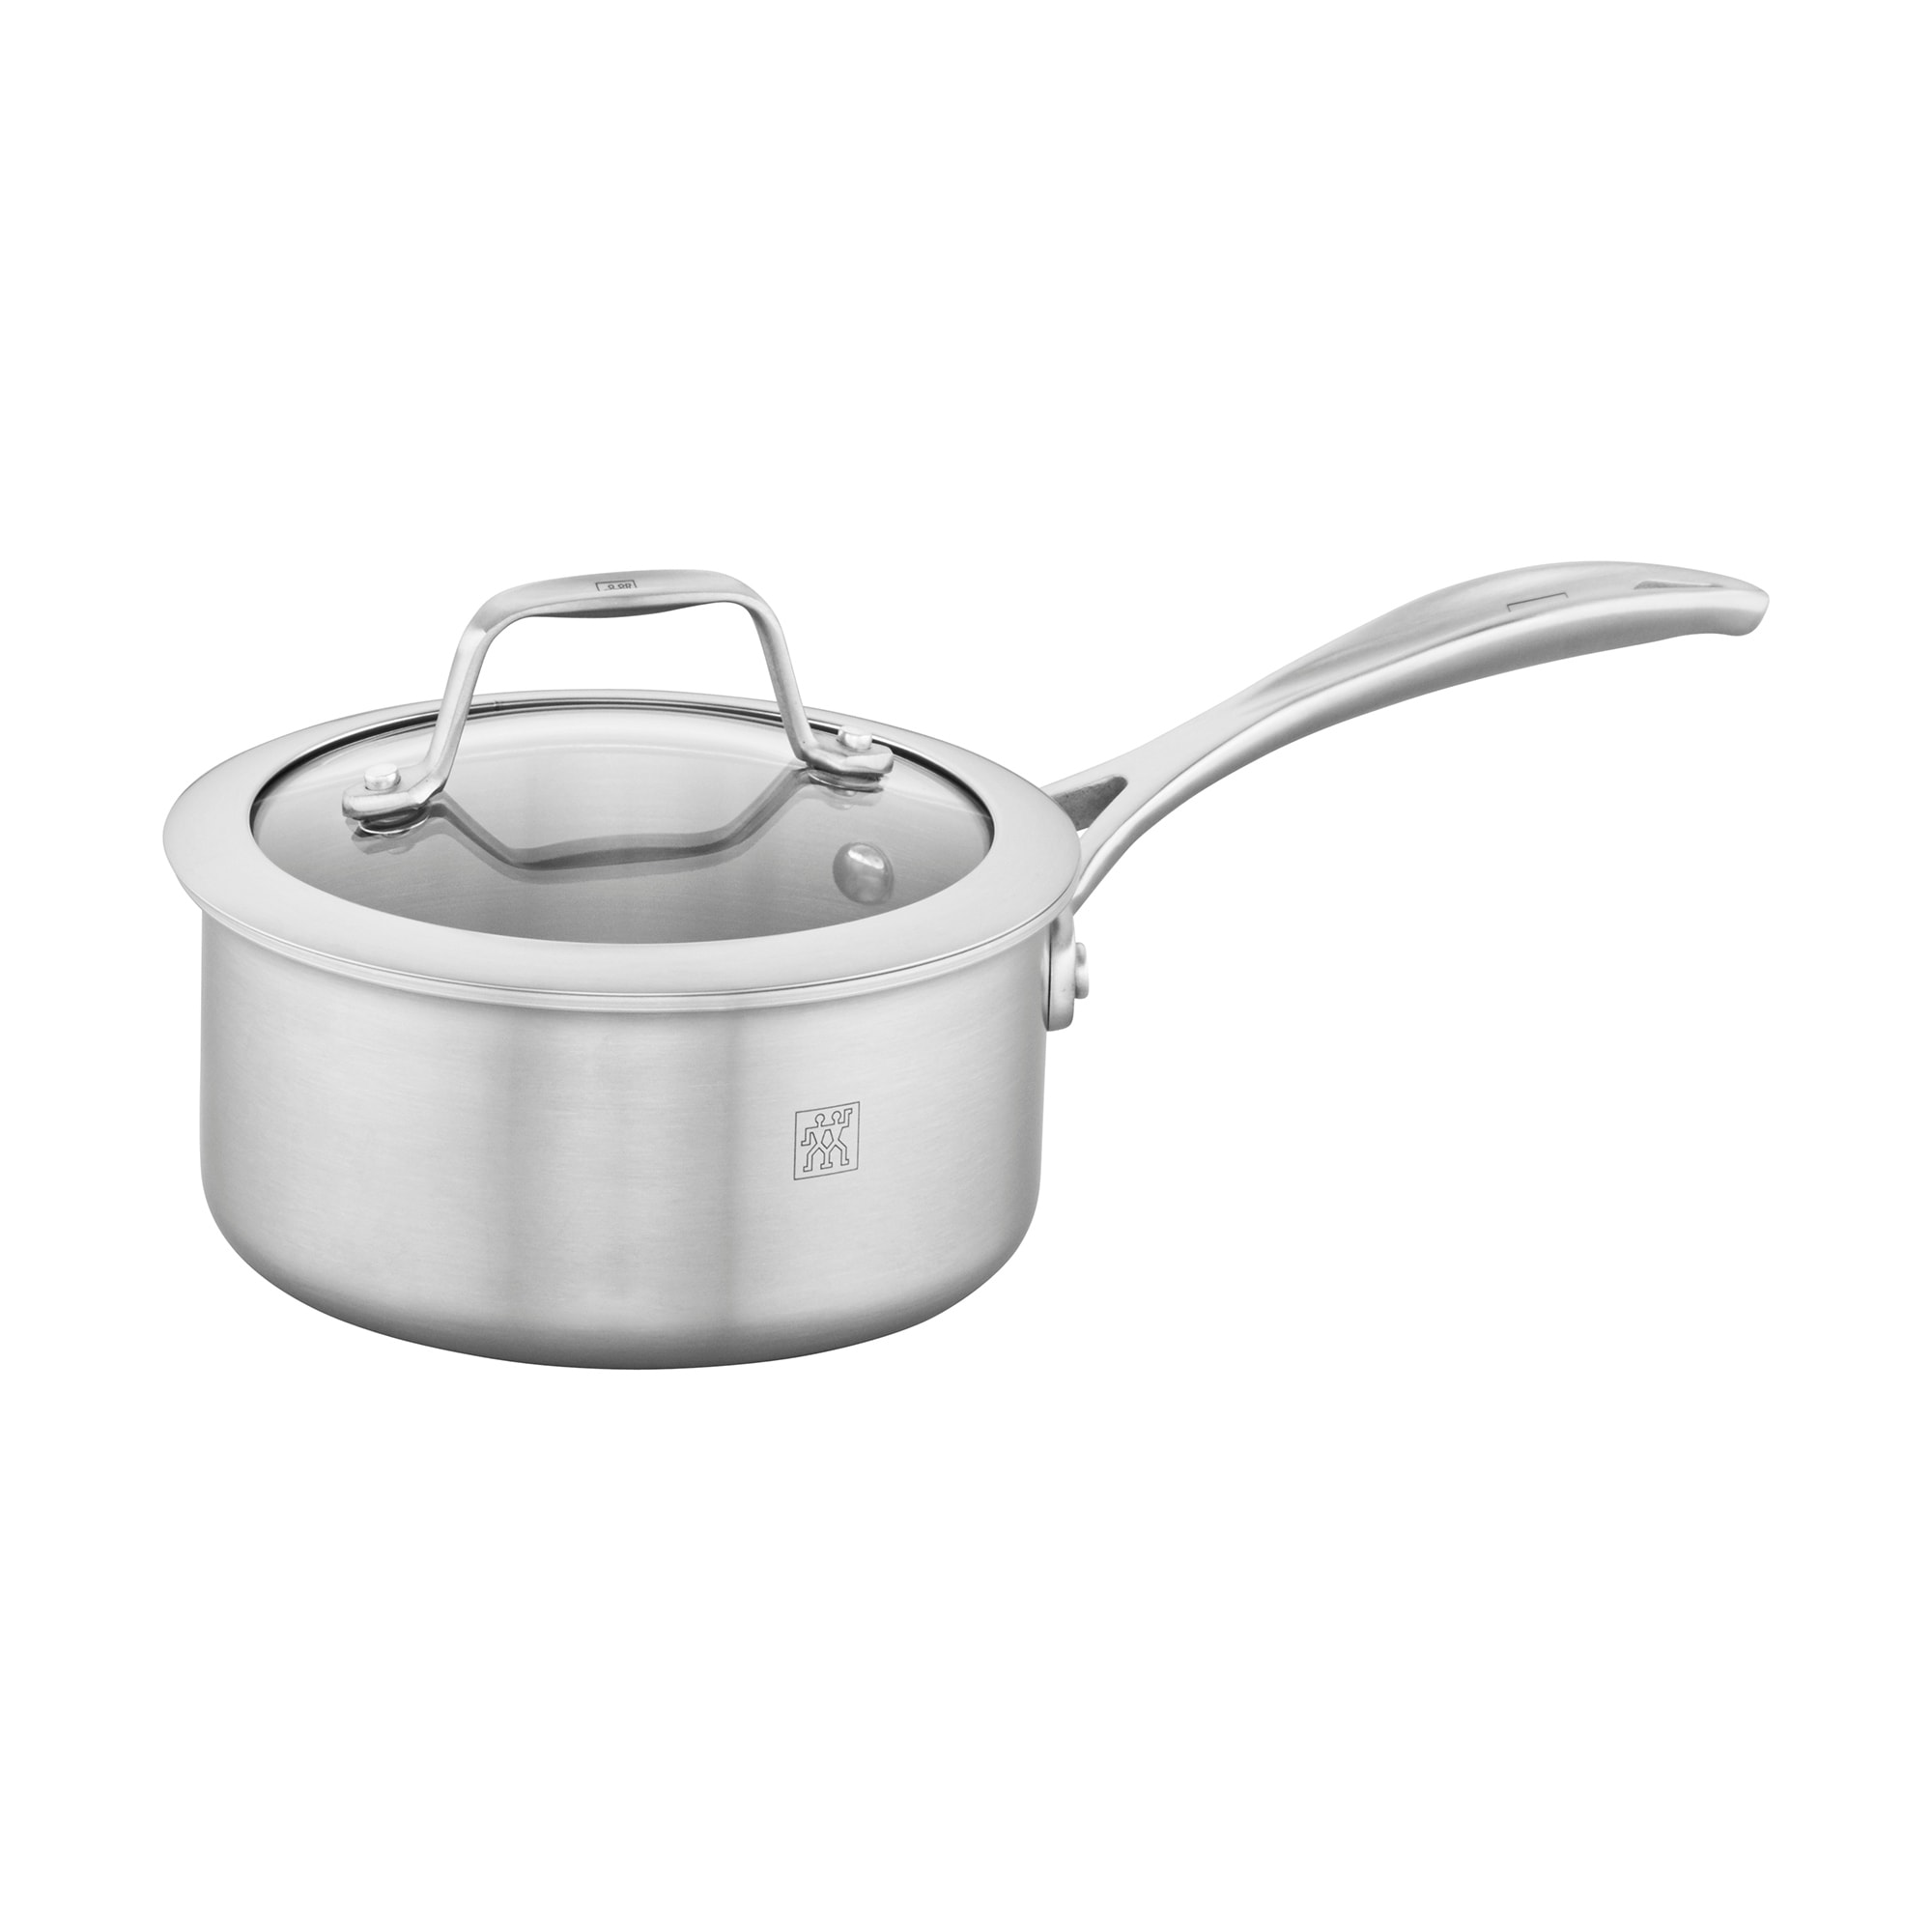 https://ak1.ostkcdn.com/images/products/is/images/direct/720168414a76833b10057f1cb794a4b4cab46066/ZWILLING-Spirit-3-ply-Stainless-Steel-Saucepan.jpg